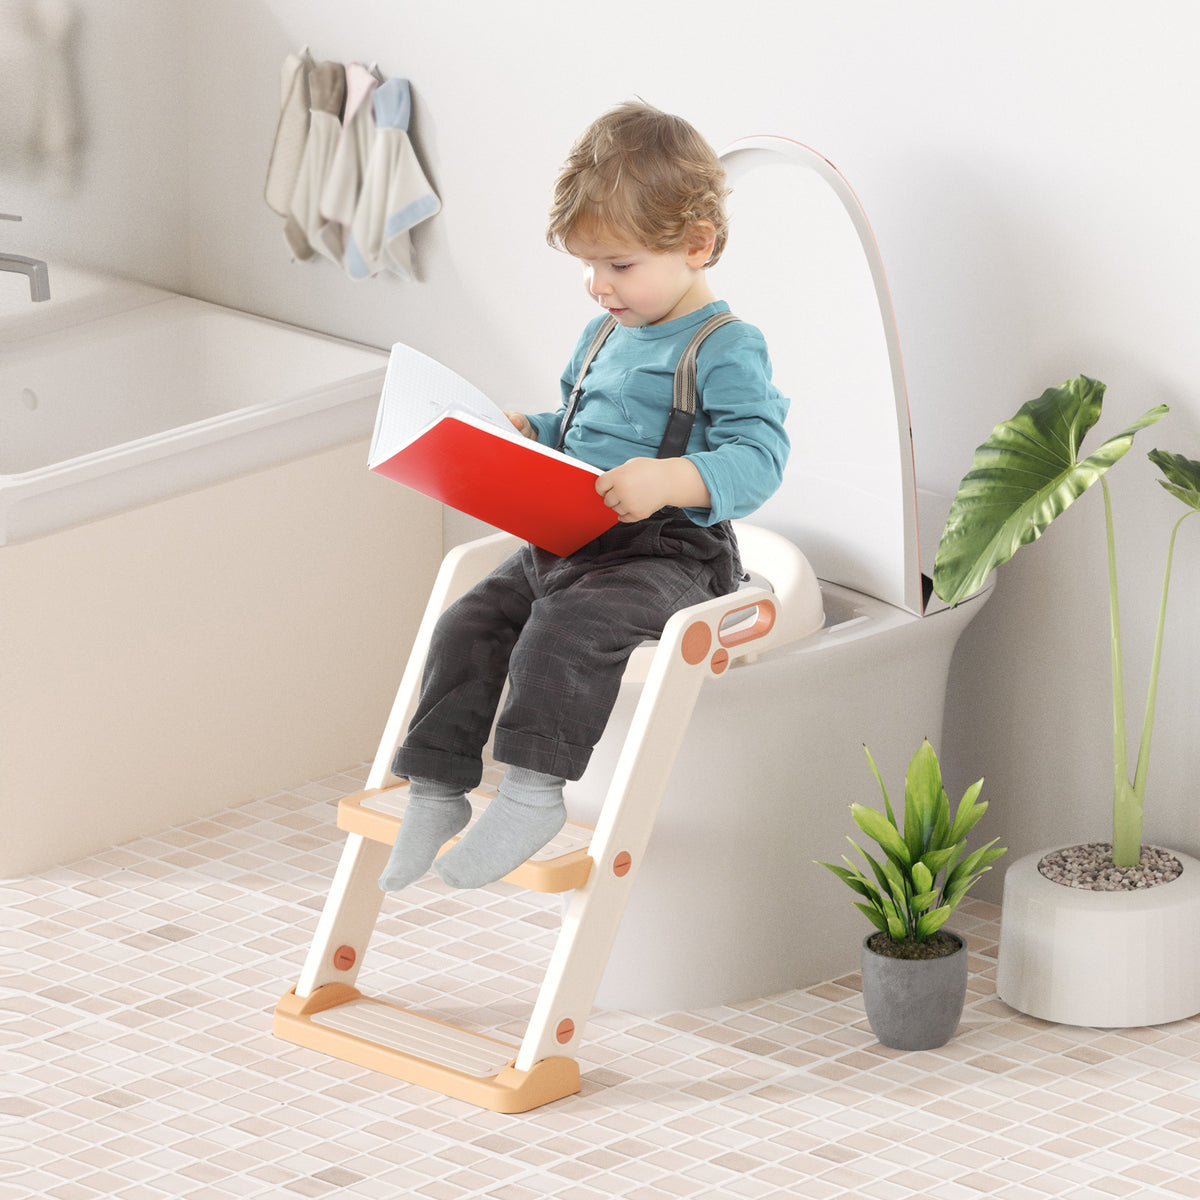 XJD Kids Toilet Training Seat with Step Ladder Gold In Stock USA